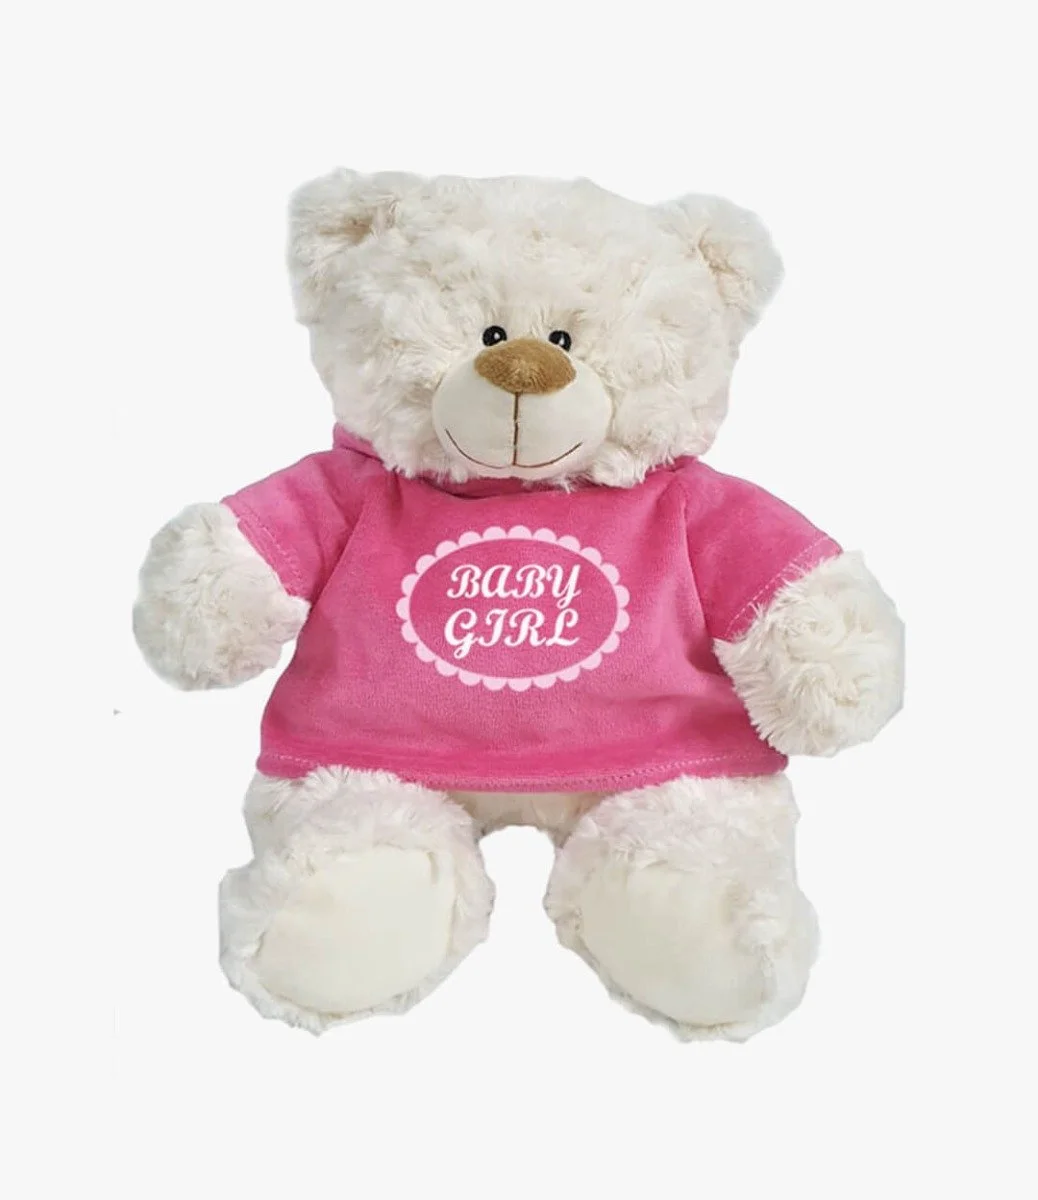 Cream Bear 38cm in Pink Velour Hoodie by Fay Lawson